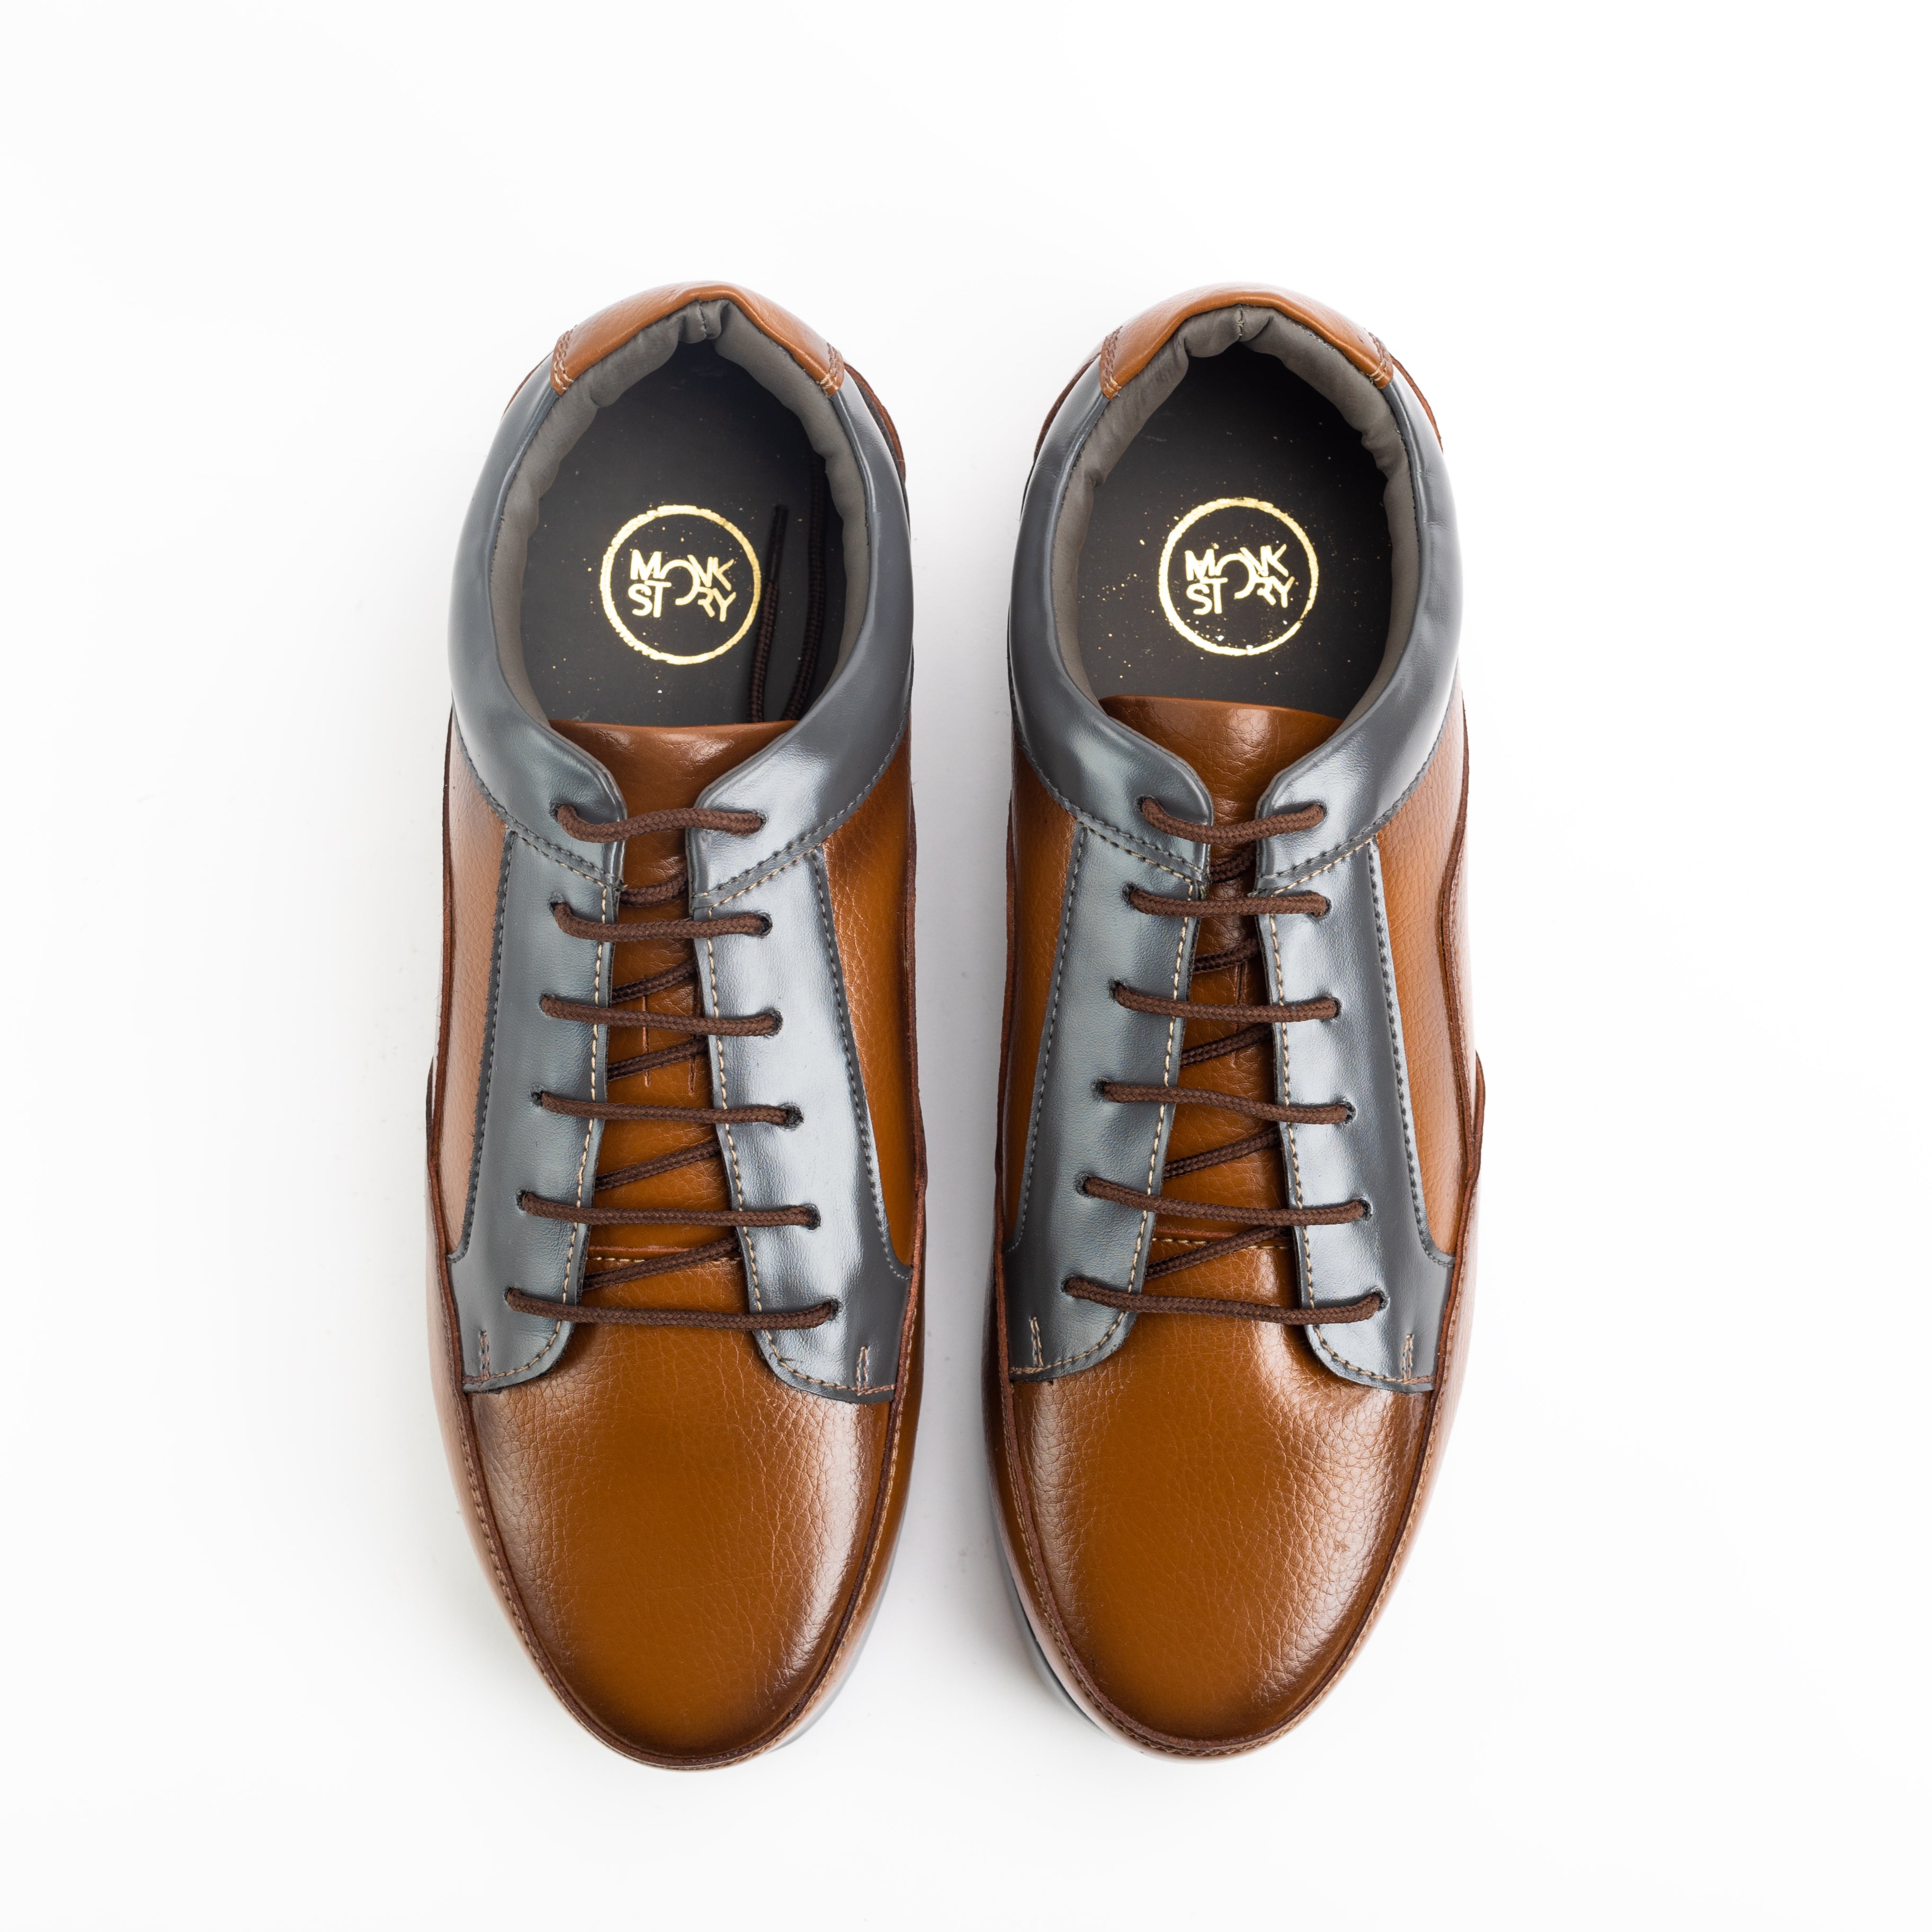 A men's brown leather shoe: Offbeat Lace Vegan Sneakers - The British Explorer by monkstory.